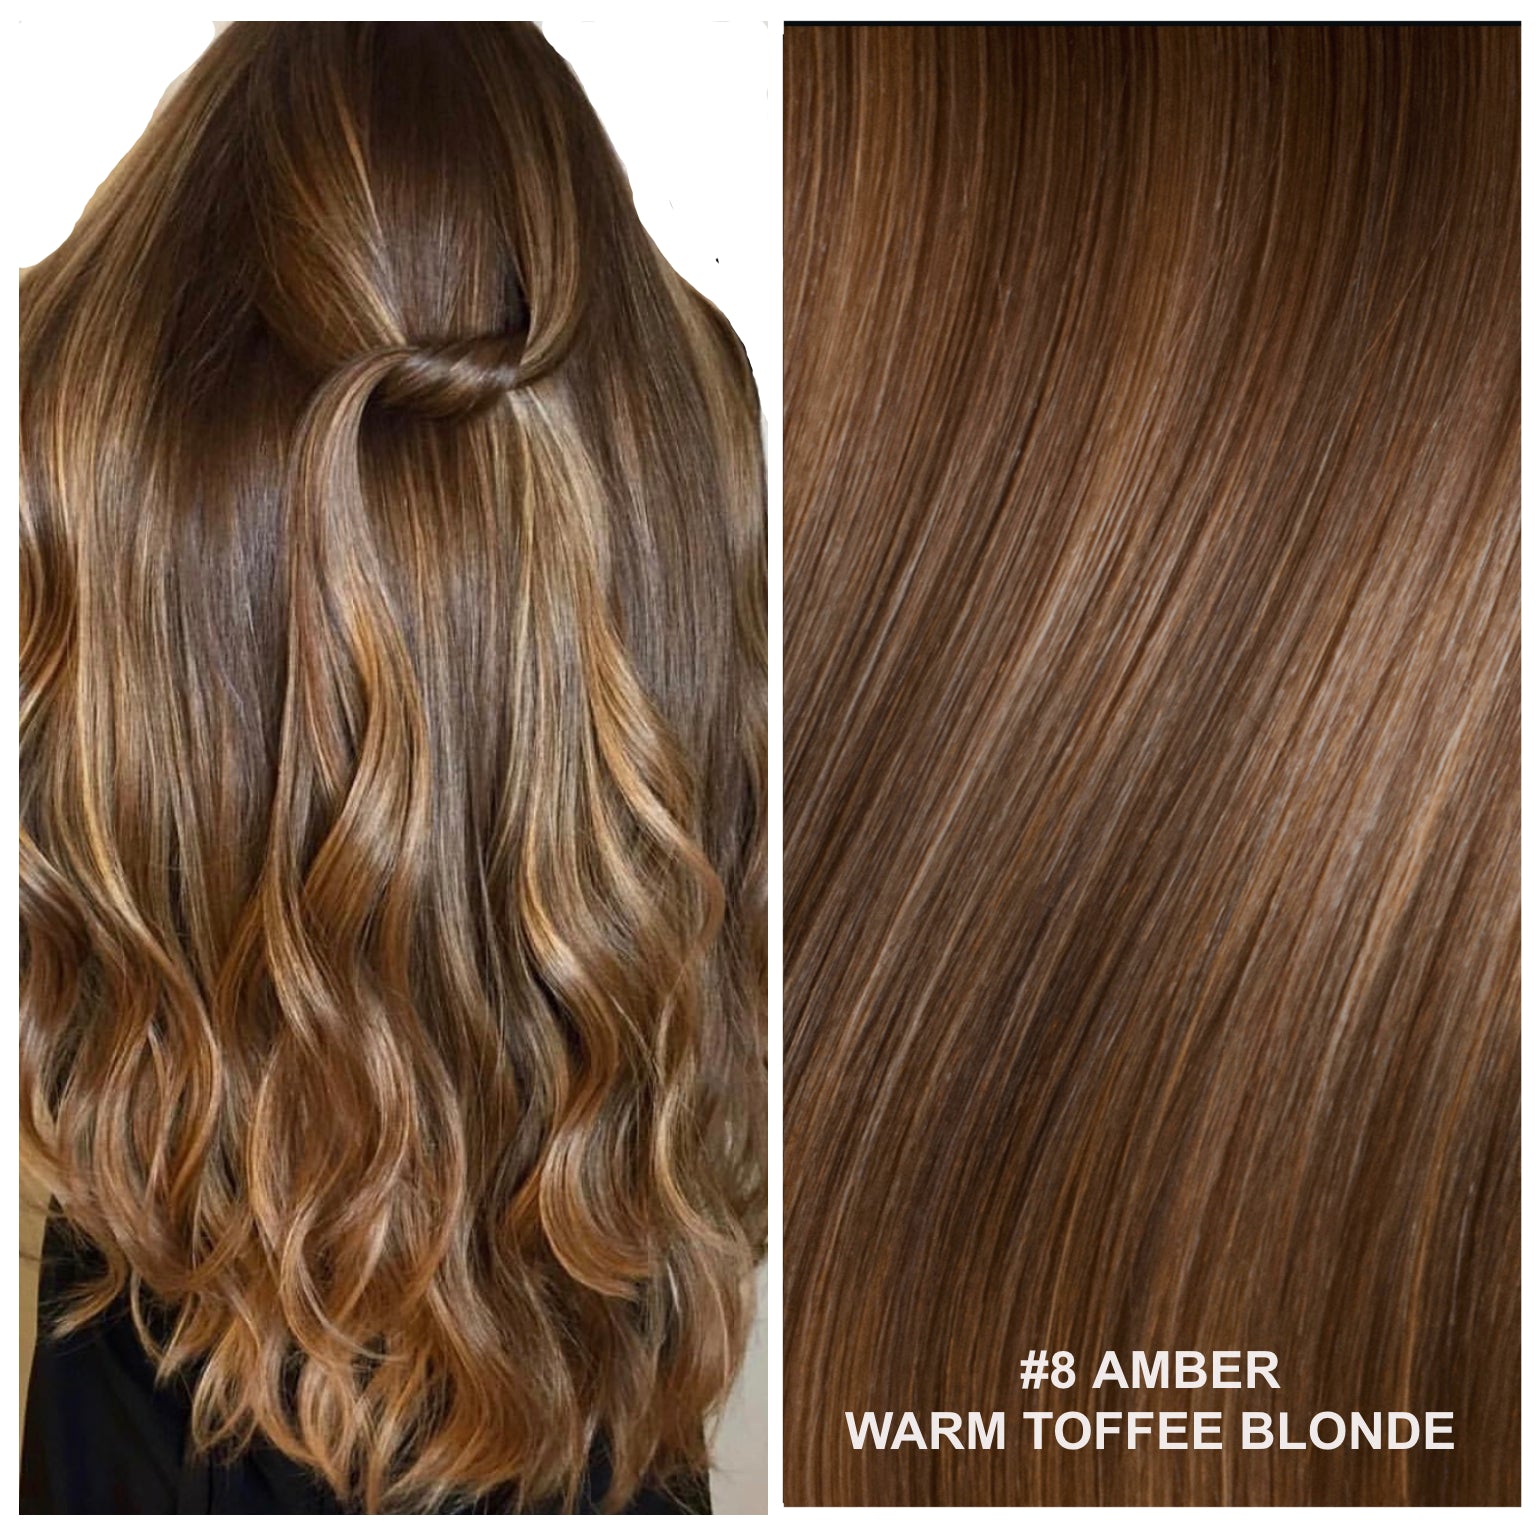 RUSSIAN WEFT WEAVE HAIR EXTENSIONS #8 AMBER WARM TOFFEE BLONDE